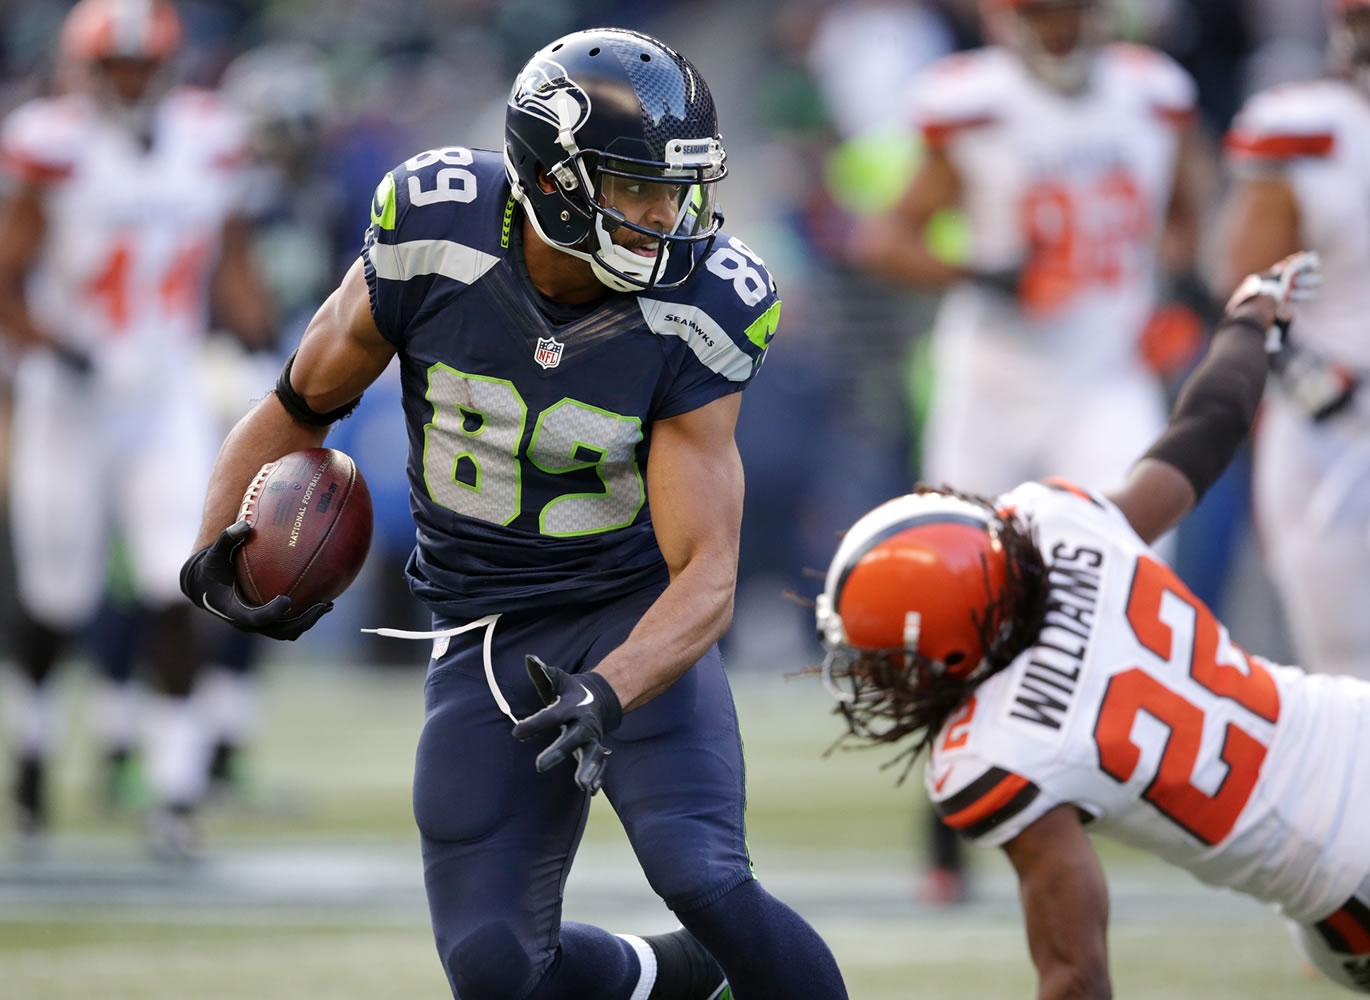 Seattle Seahawks' Doug Baldwin runs with the ball after a pass reception as Cleveland Browns' Tramon Williams falls behind in the second half of an NFL football game, Sunday, Dec. 20, 2015, in Seattle.